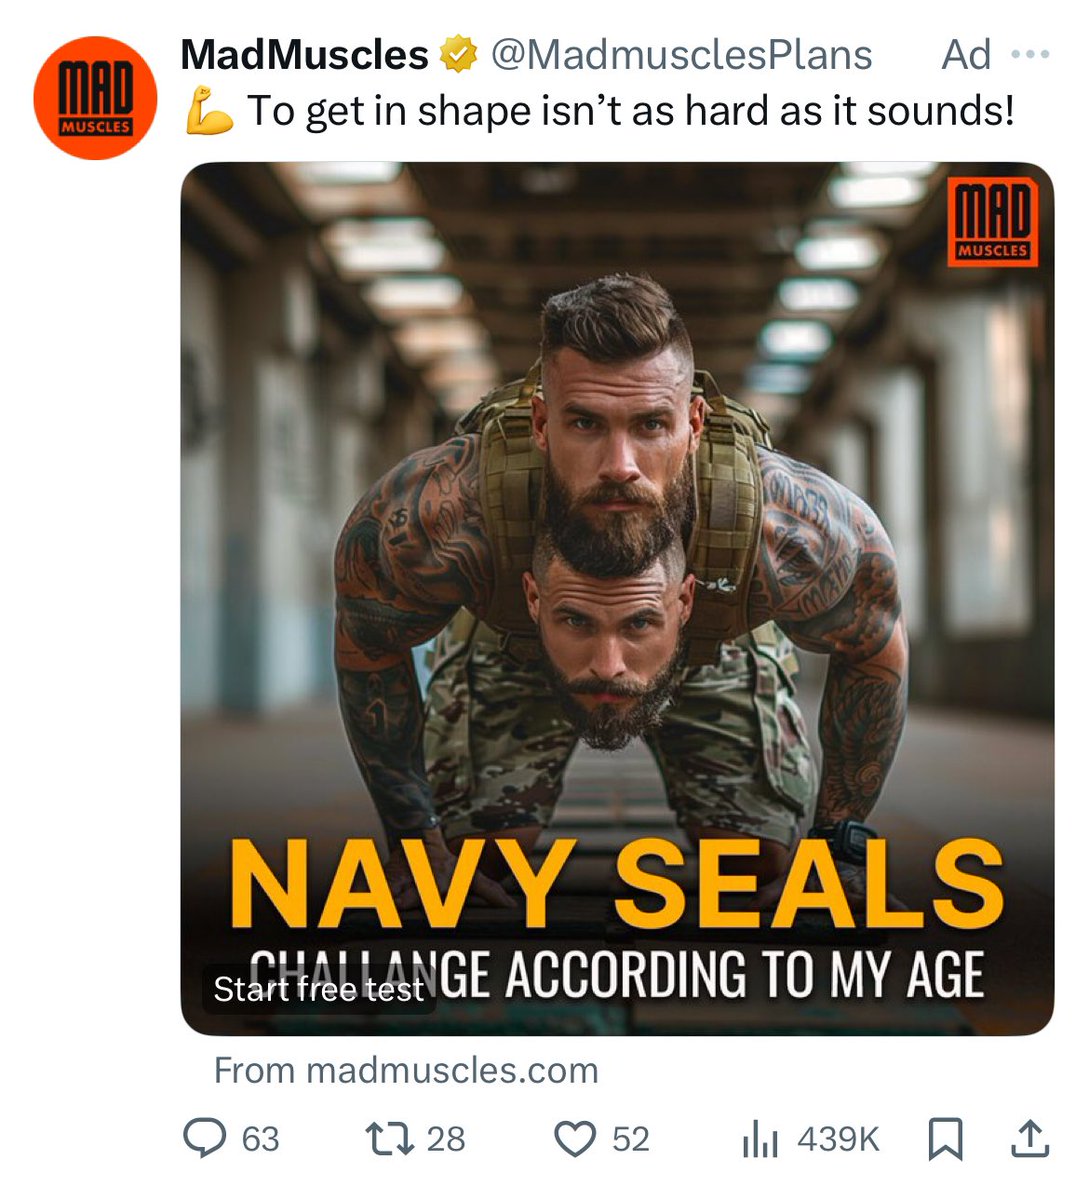 I don’t think I will accept the “challange” to be a two-headed Navy Seal 😂 #AI #fail